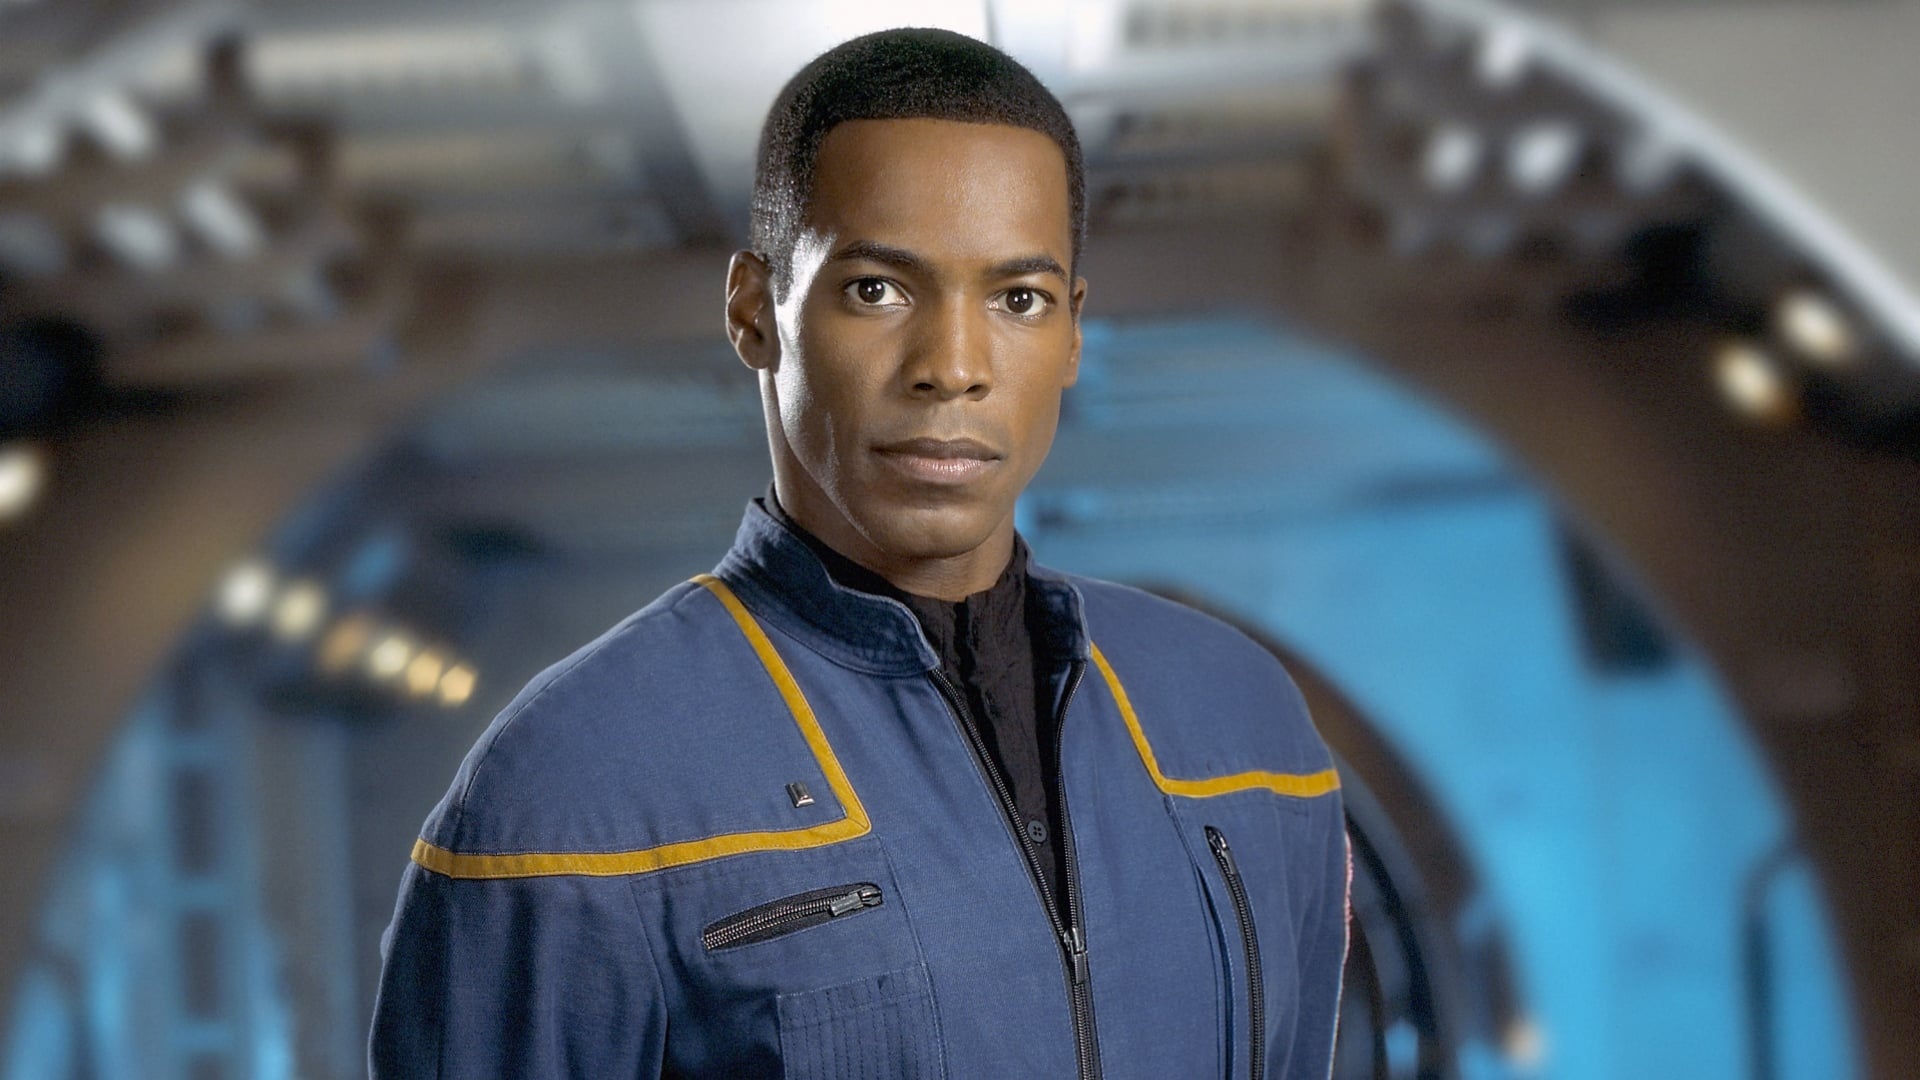 Enterprise (TV Series): Travis Mayweather, A Human Starfleet officer, Portrayed by Anthony Montgomery. 1920x1080 Full HD Background.